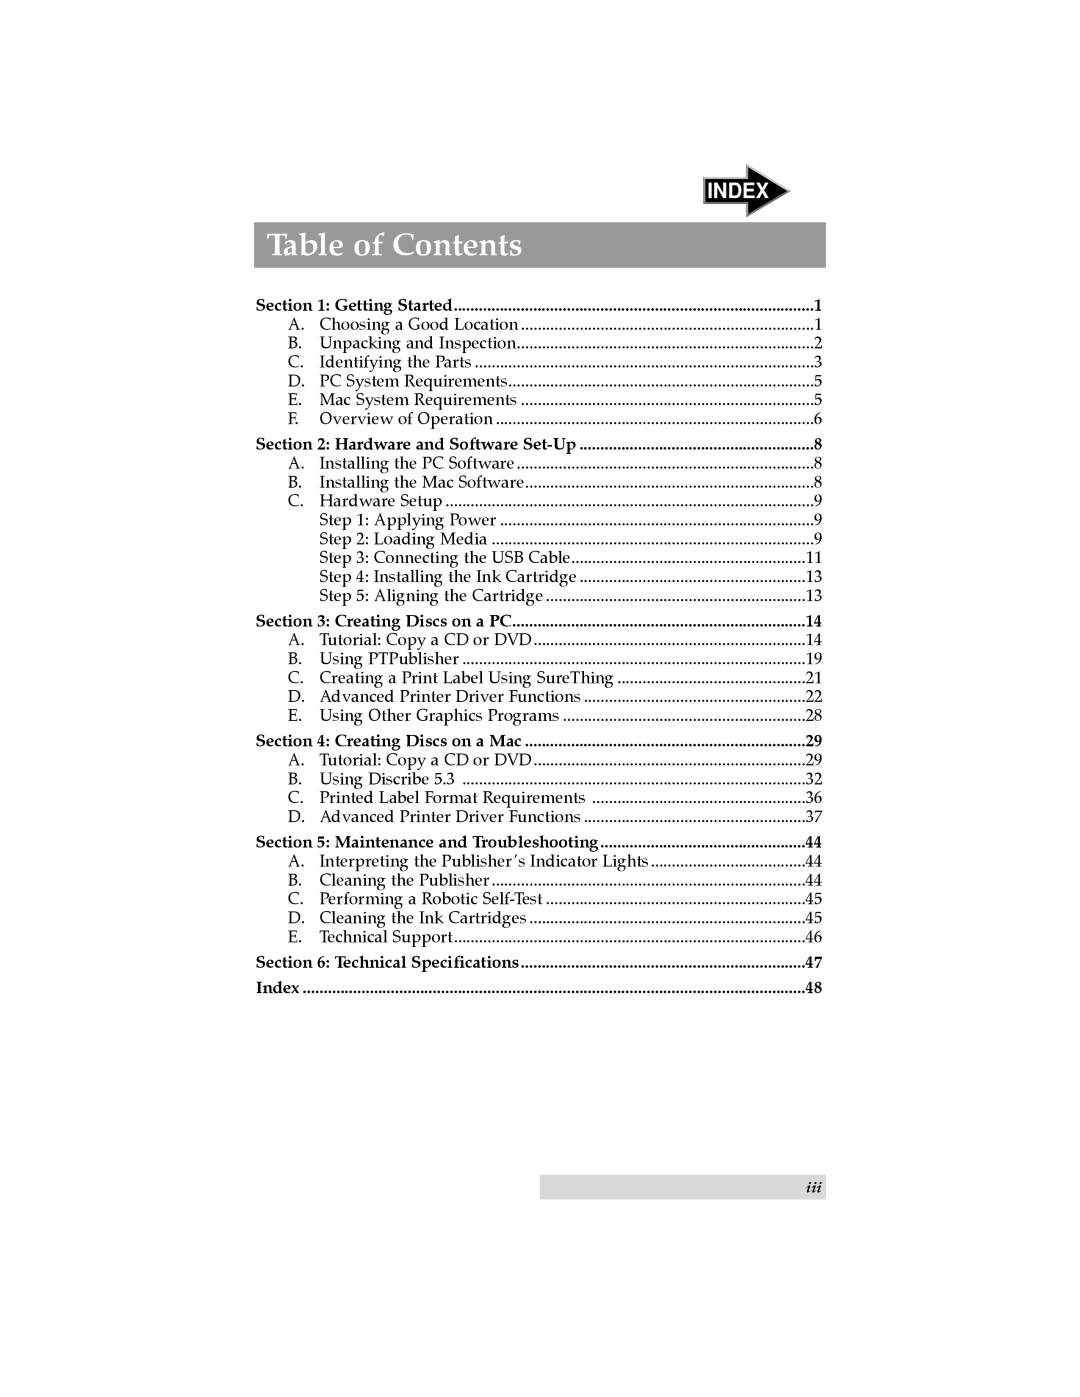 Primera Technology SE user manual Table of Contents, Index 